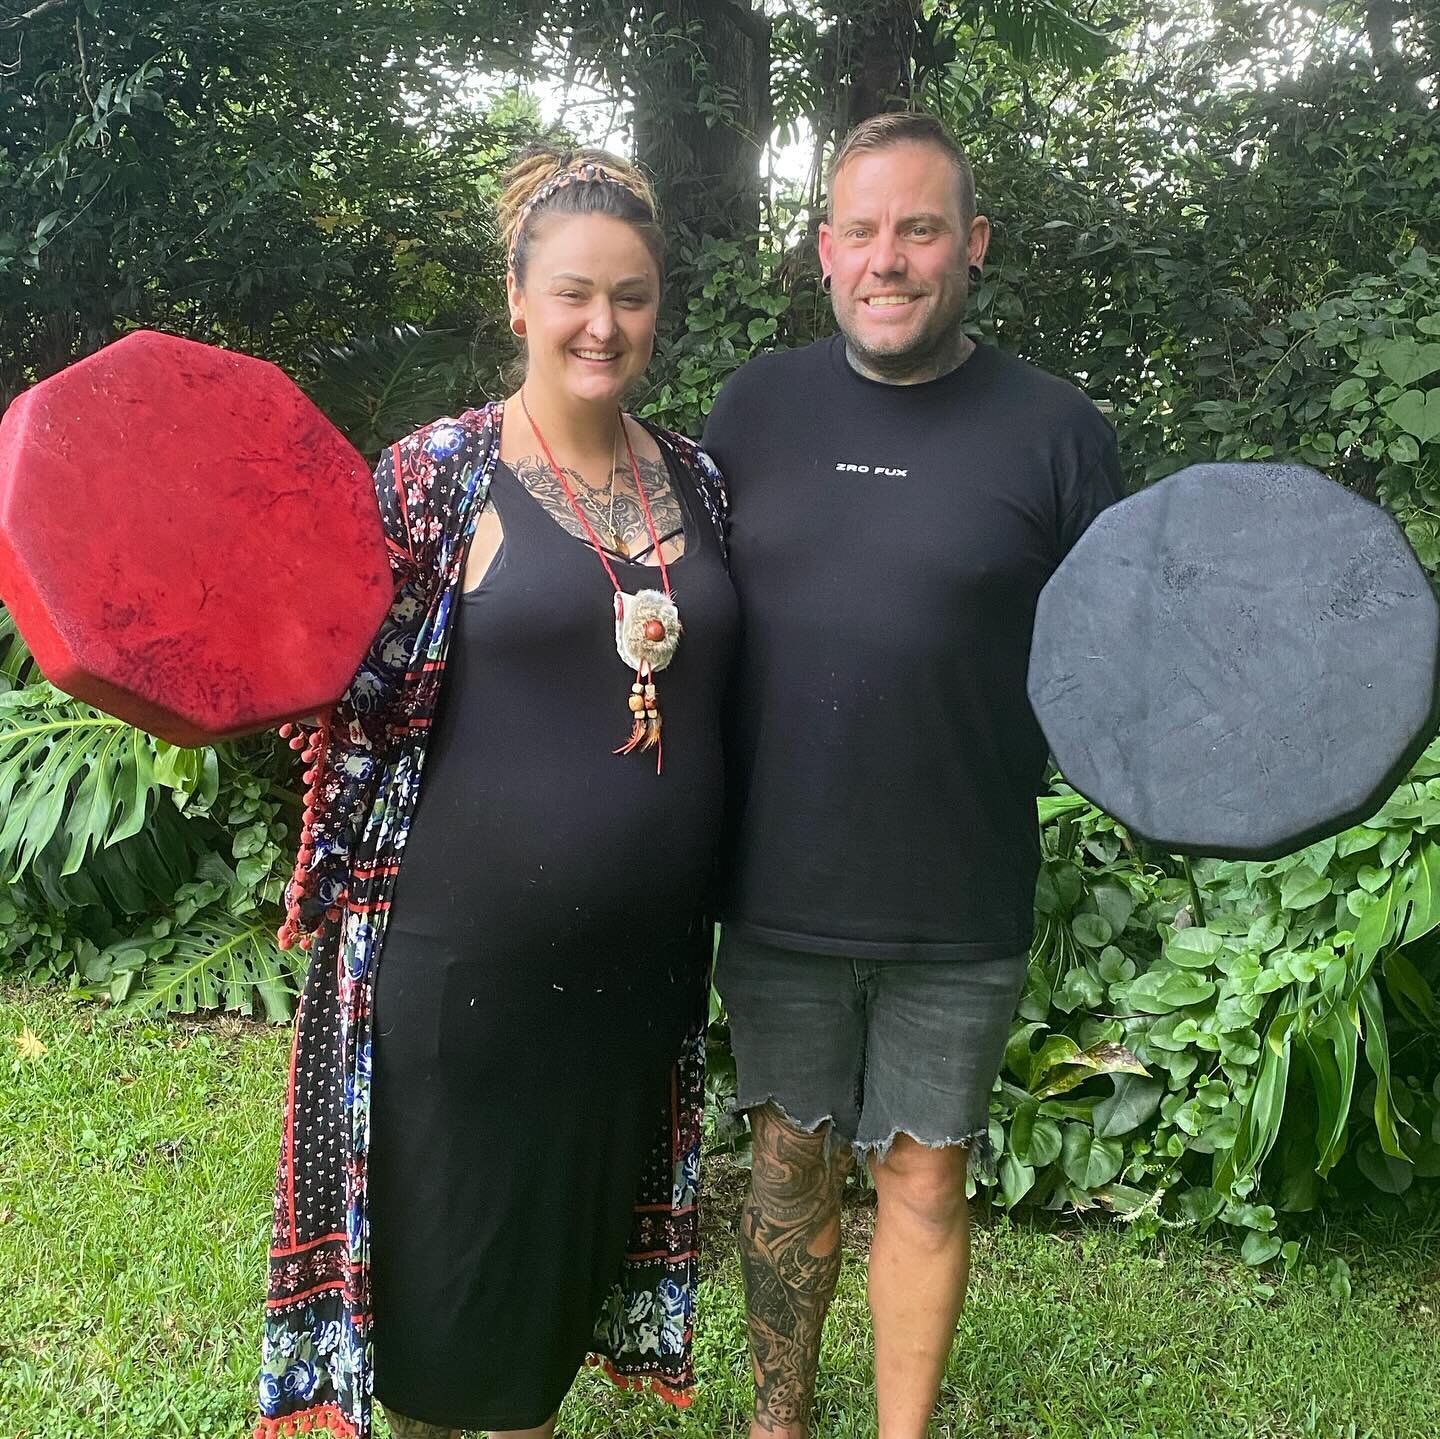 A wonderful Saturday shared in the company of this fabulous couple making drums to celebrate their love and devotion to each other and their growing family ❤️